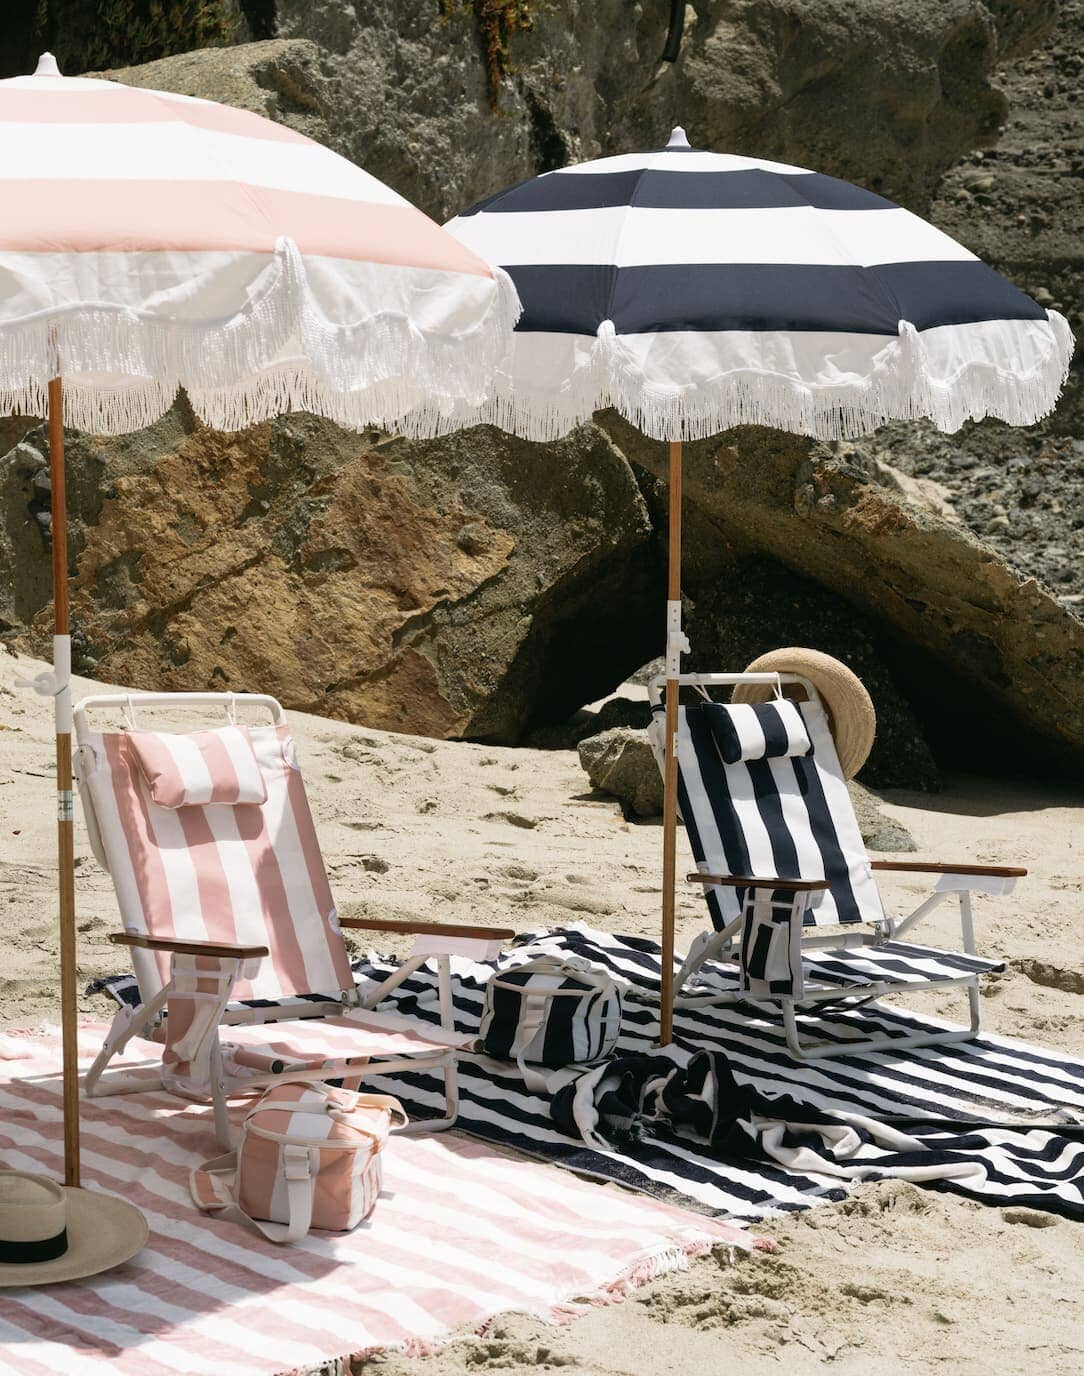 beach scene with pink and navy umbrellas, towels and coolers